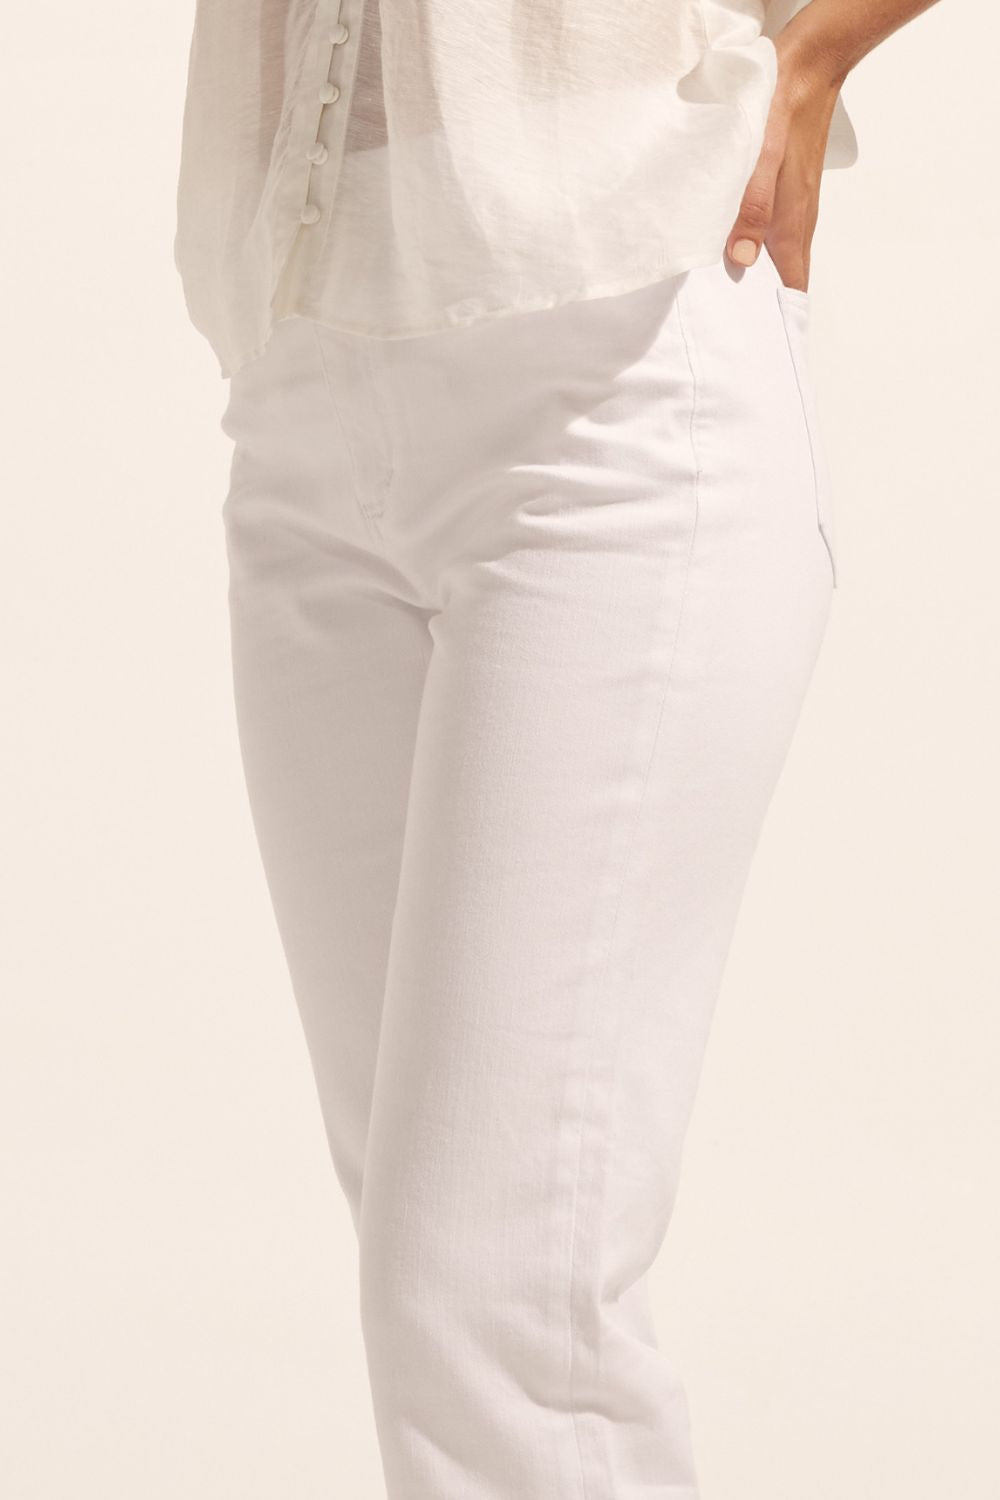 white, pant, cuffed jeans, mid rise jean, straight cut, close up image